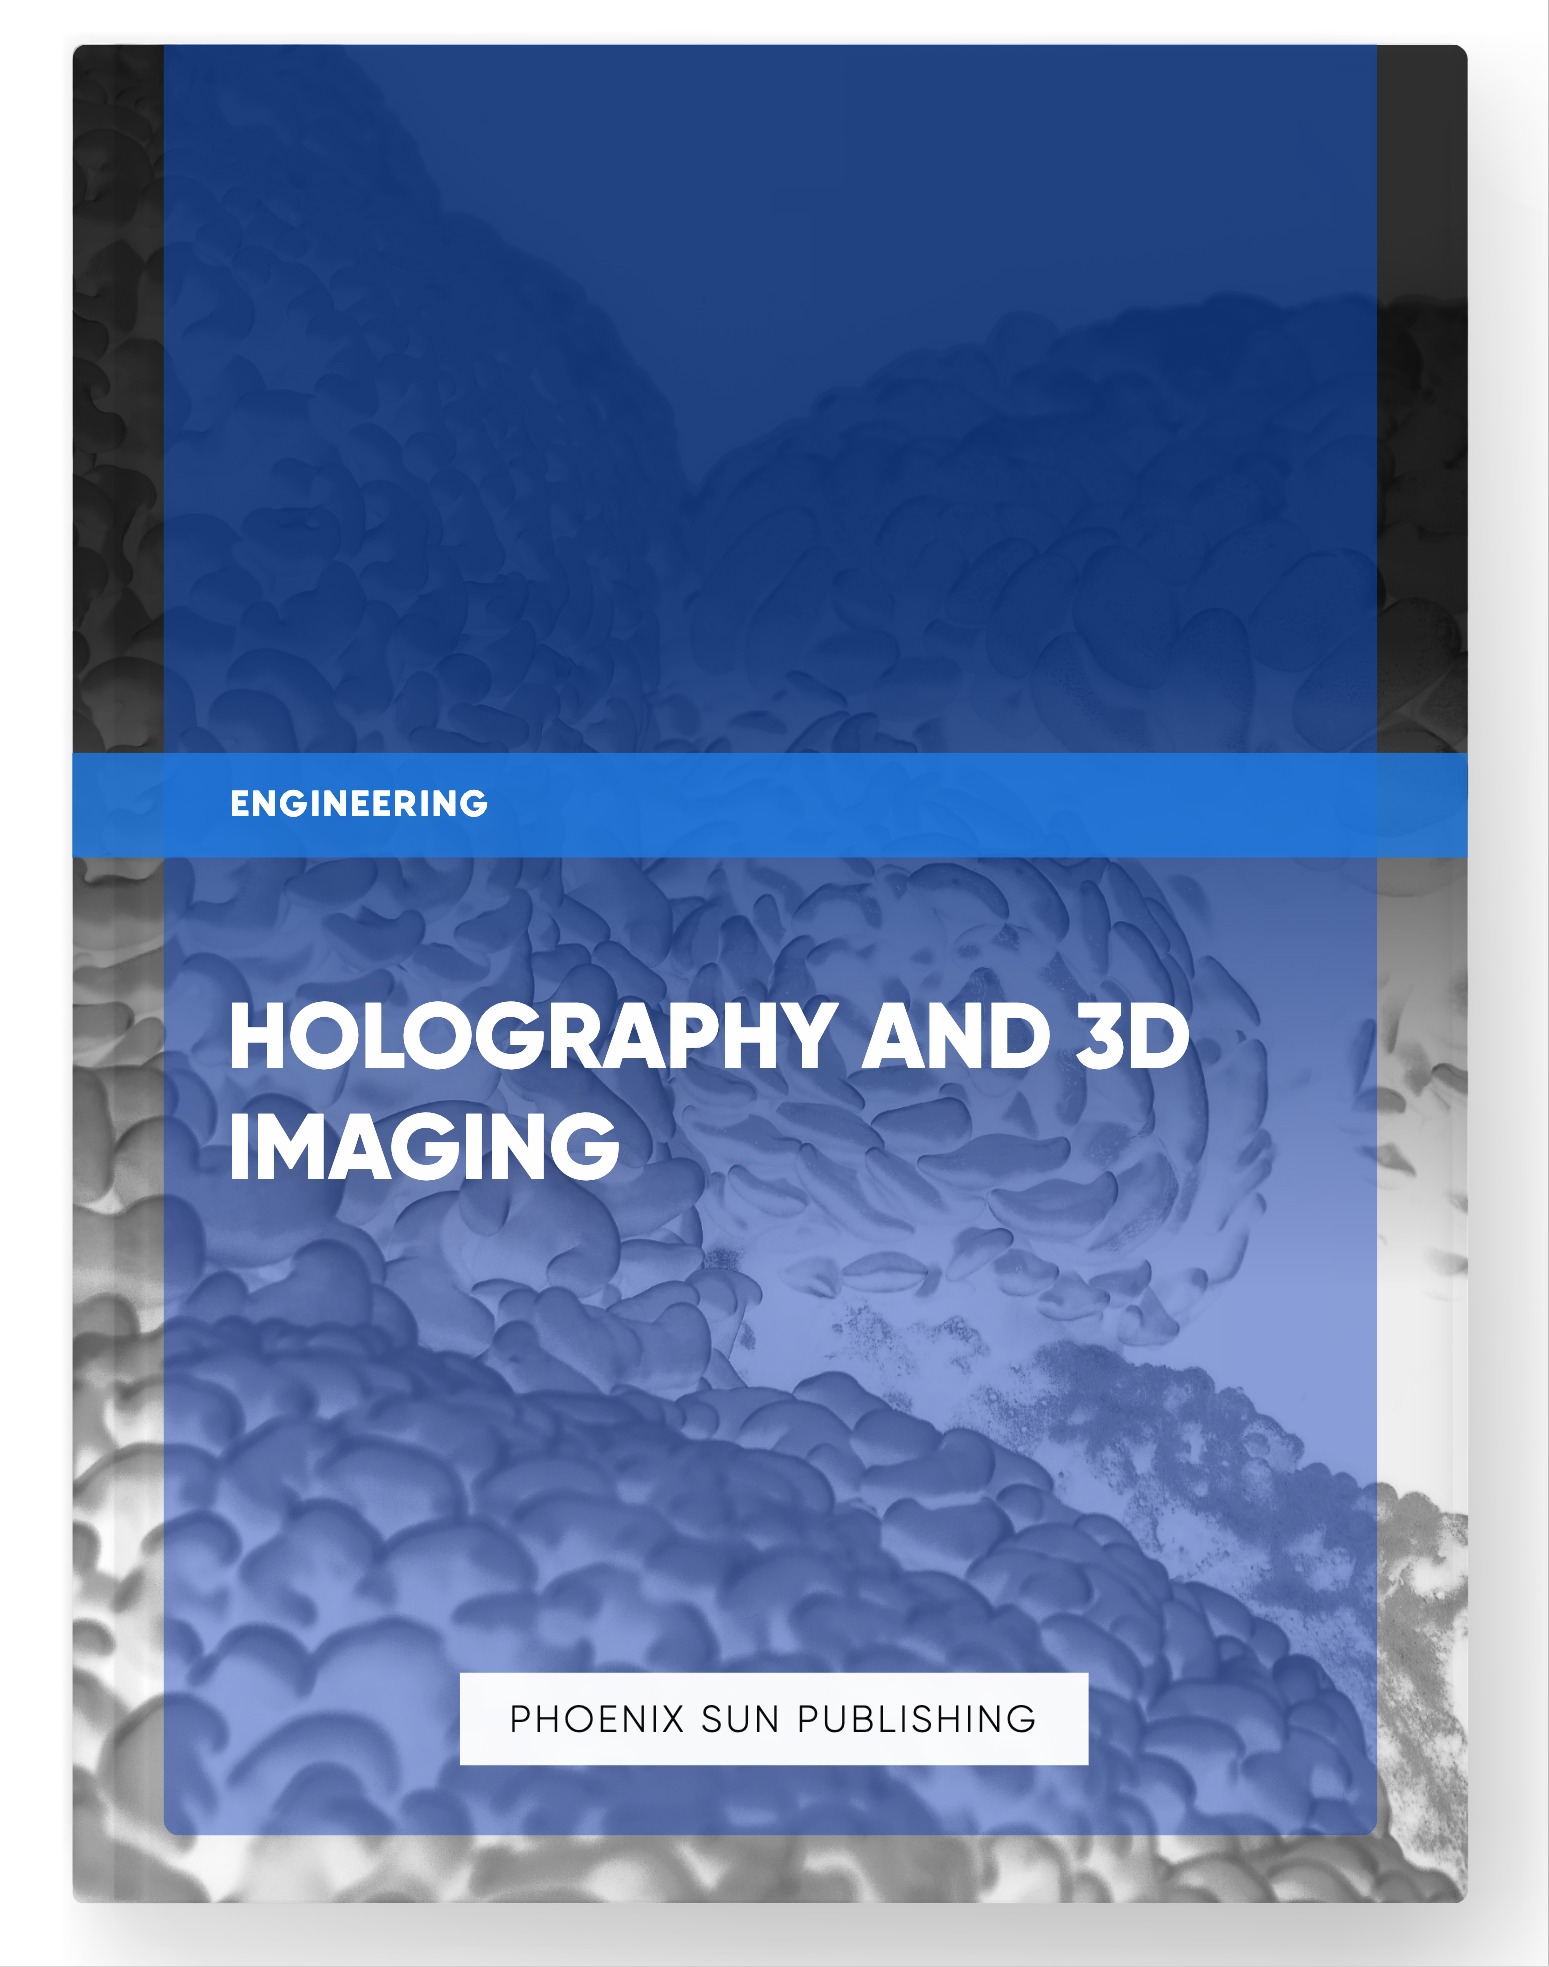 Holography and 3D Imaging